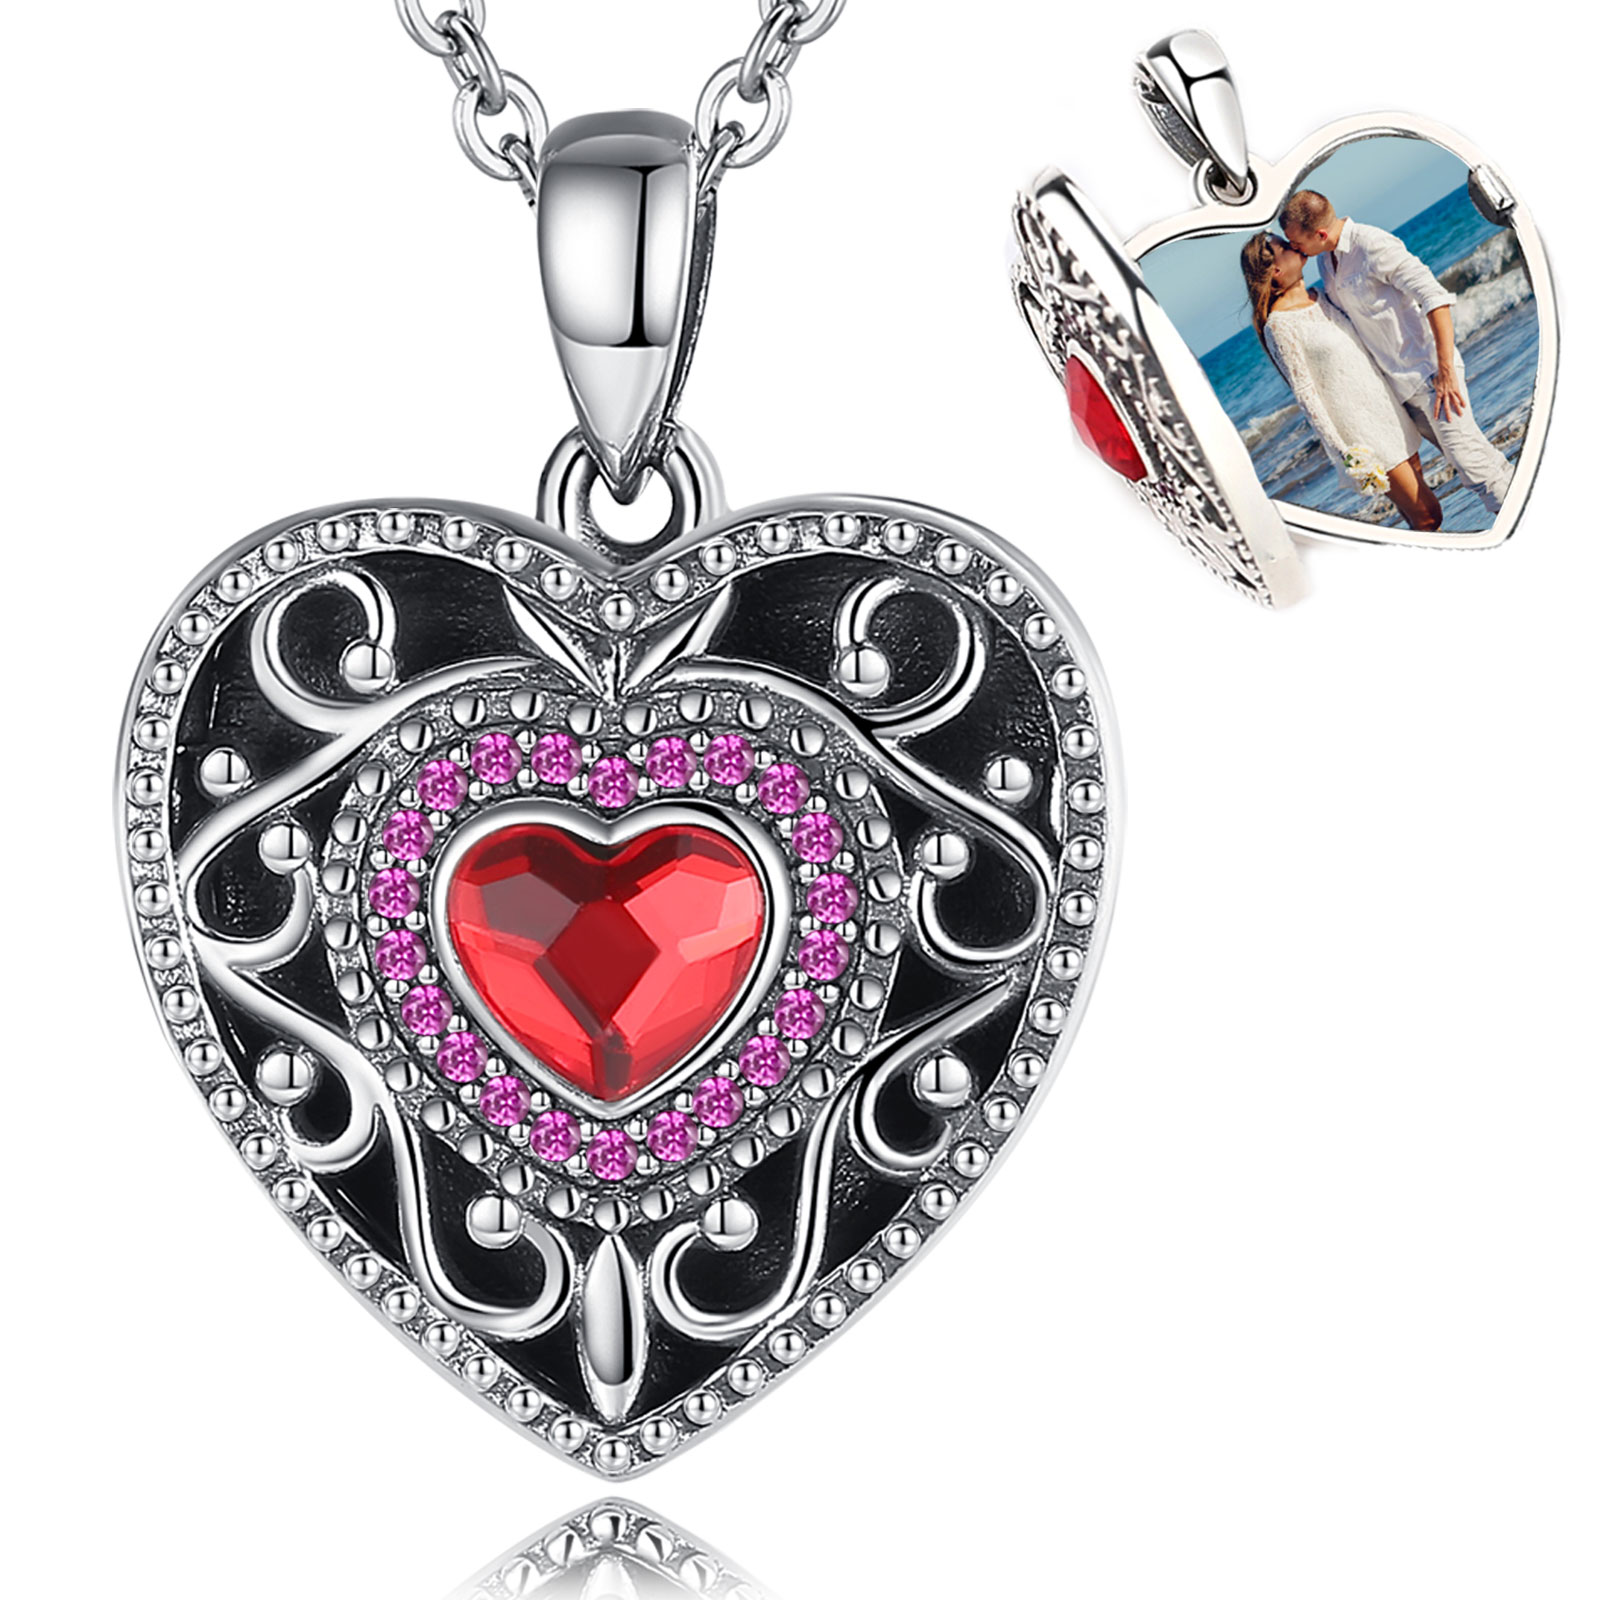 Merryshine Memorial Jewelry 925 Sterling Silver Heart Pendant Photo Locket Necklaces with Cubic Zirconia